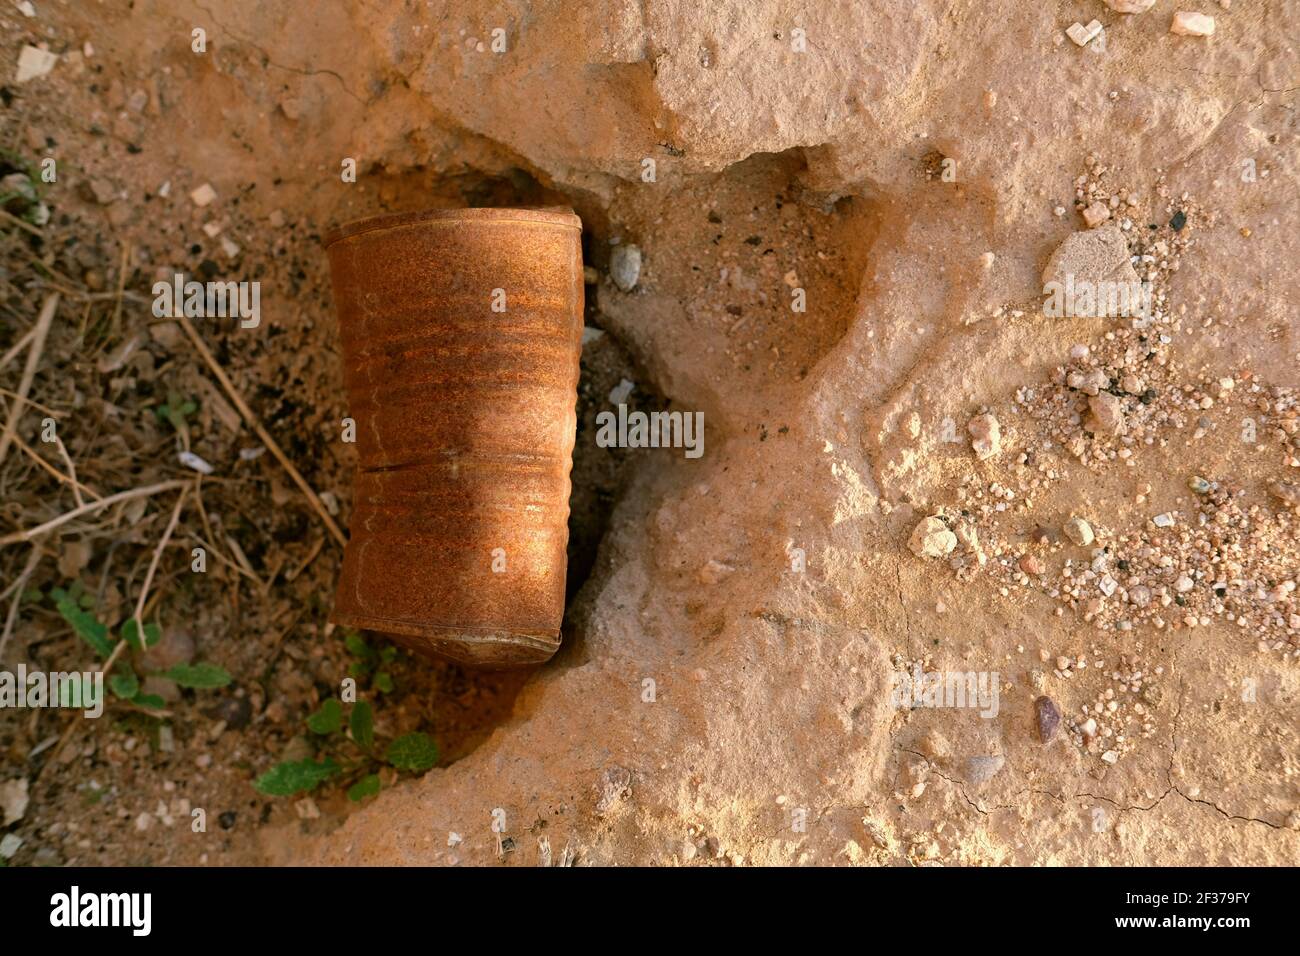 Corroded tin can on the ground; ravages of time on modern civilization; rust and aging; effects of metal exposed to oxygen and moisture over time. Stock Photo